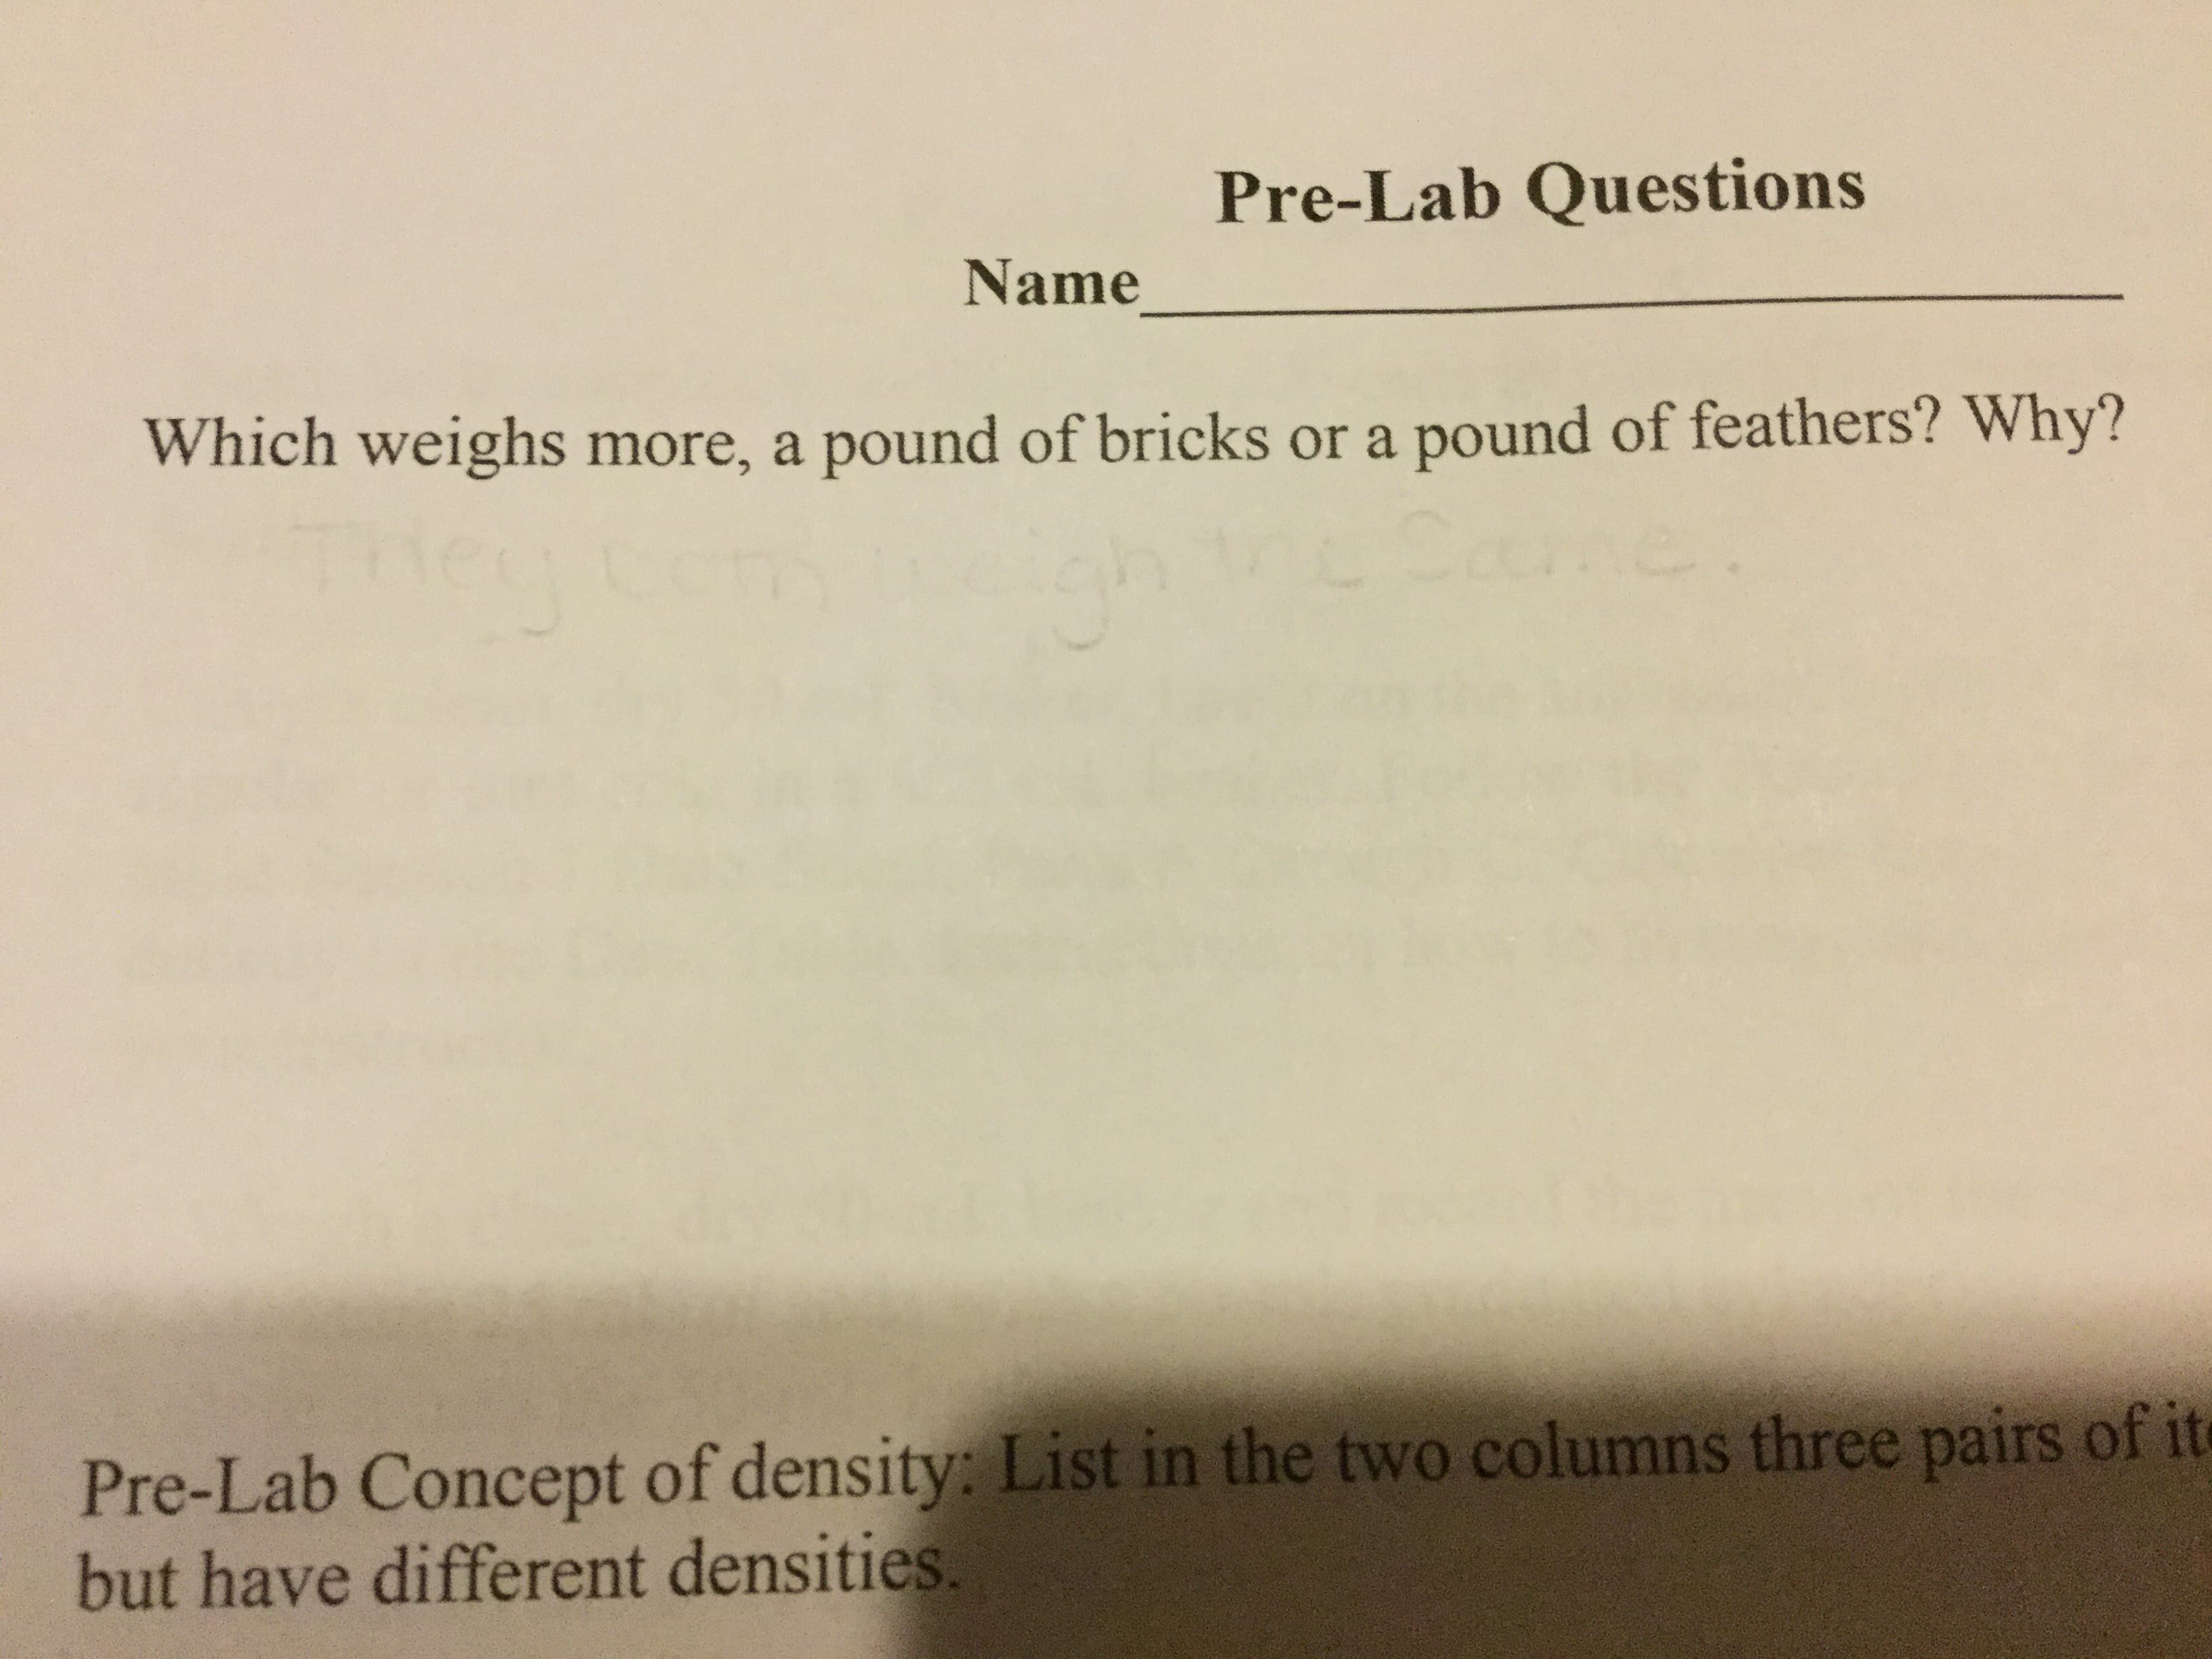 Pre-Lab Questions
Name
Which weighs more, a pound of bricks or a pound of feathers? Why?
Pre-Lab Concept of density: List in the two columns three pairs of it
but have different densities.
